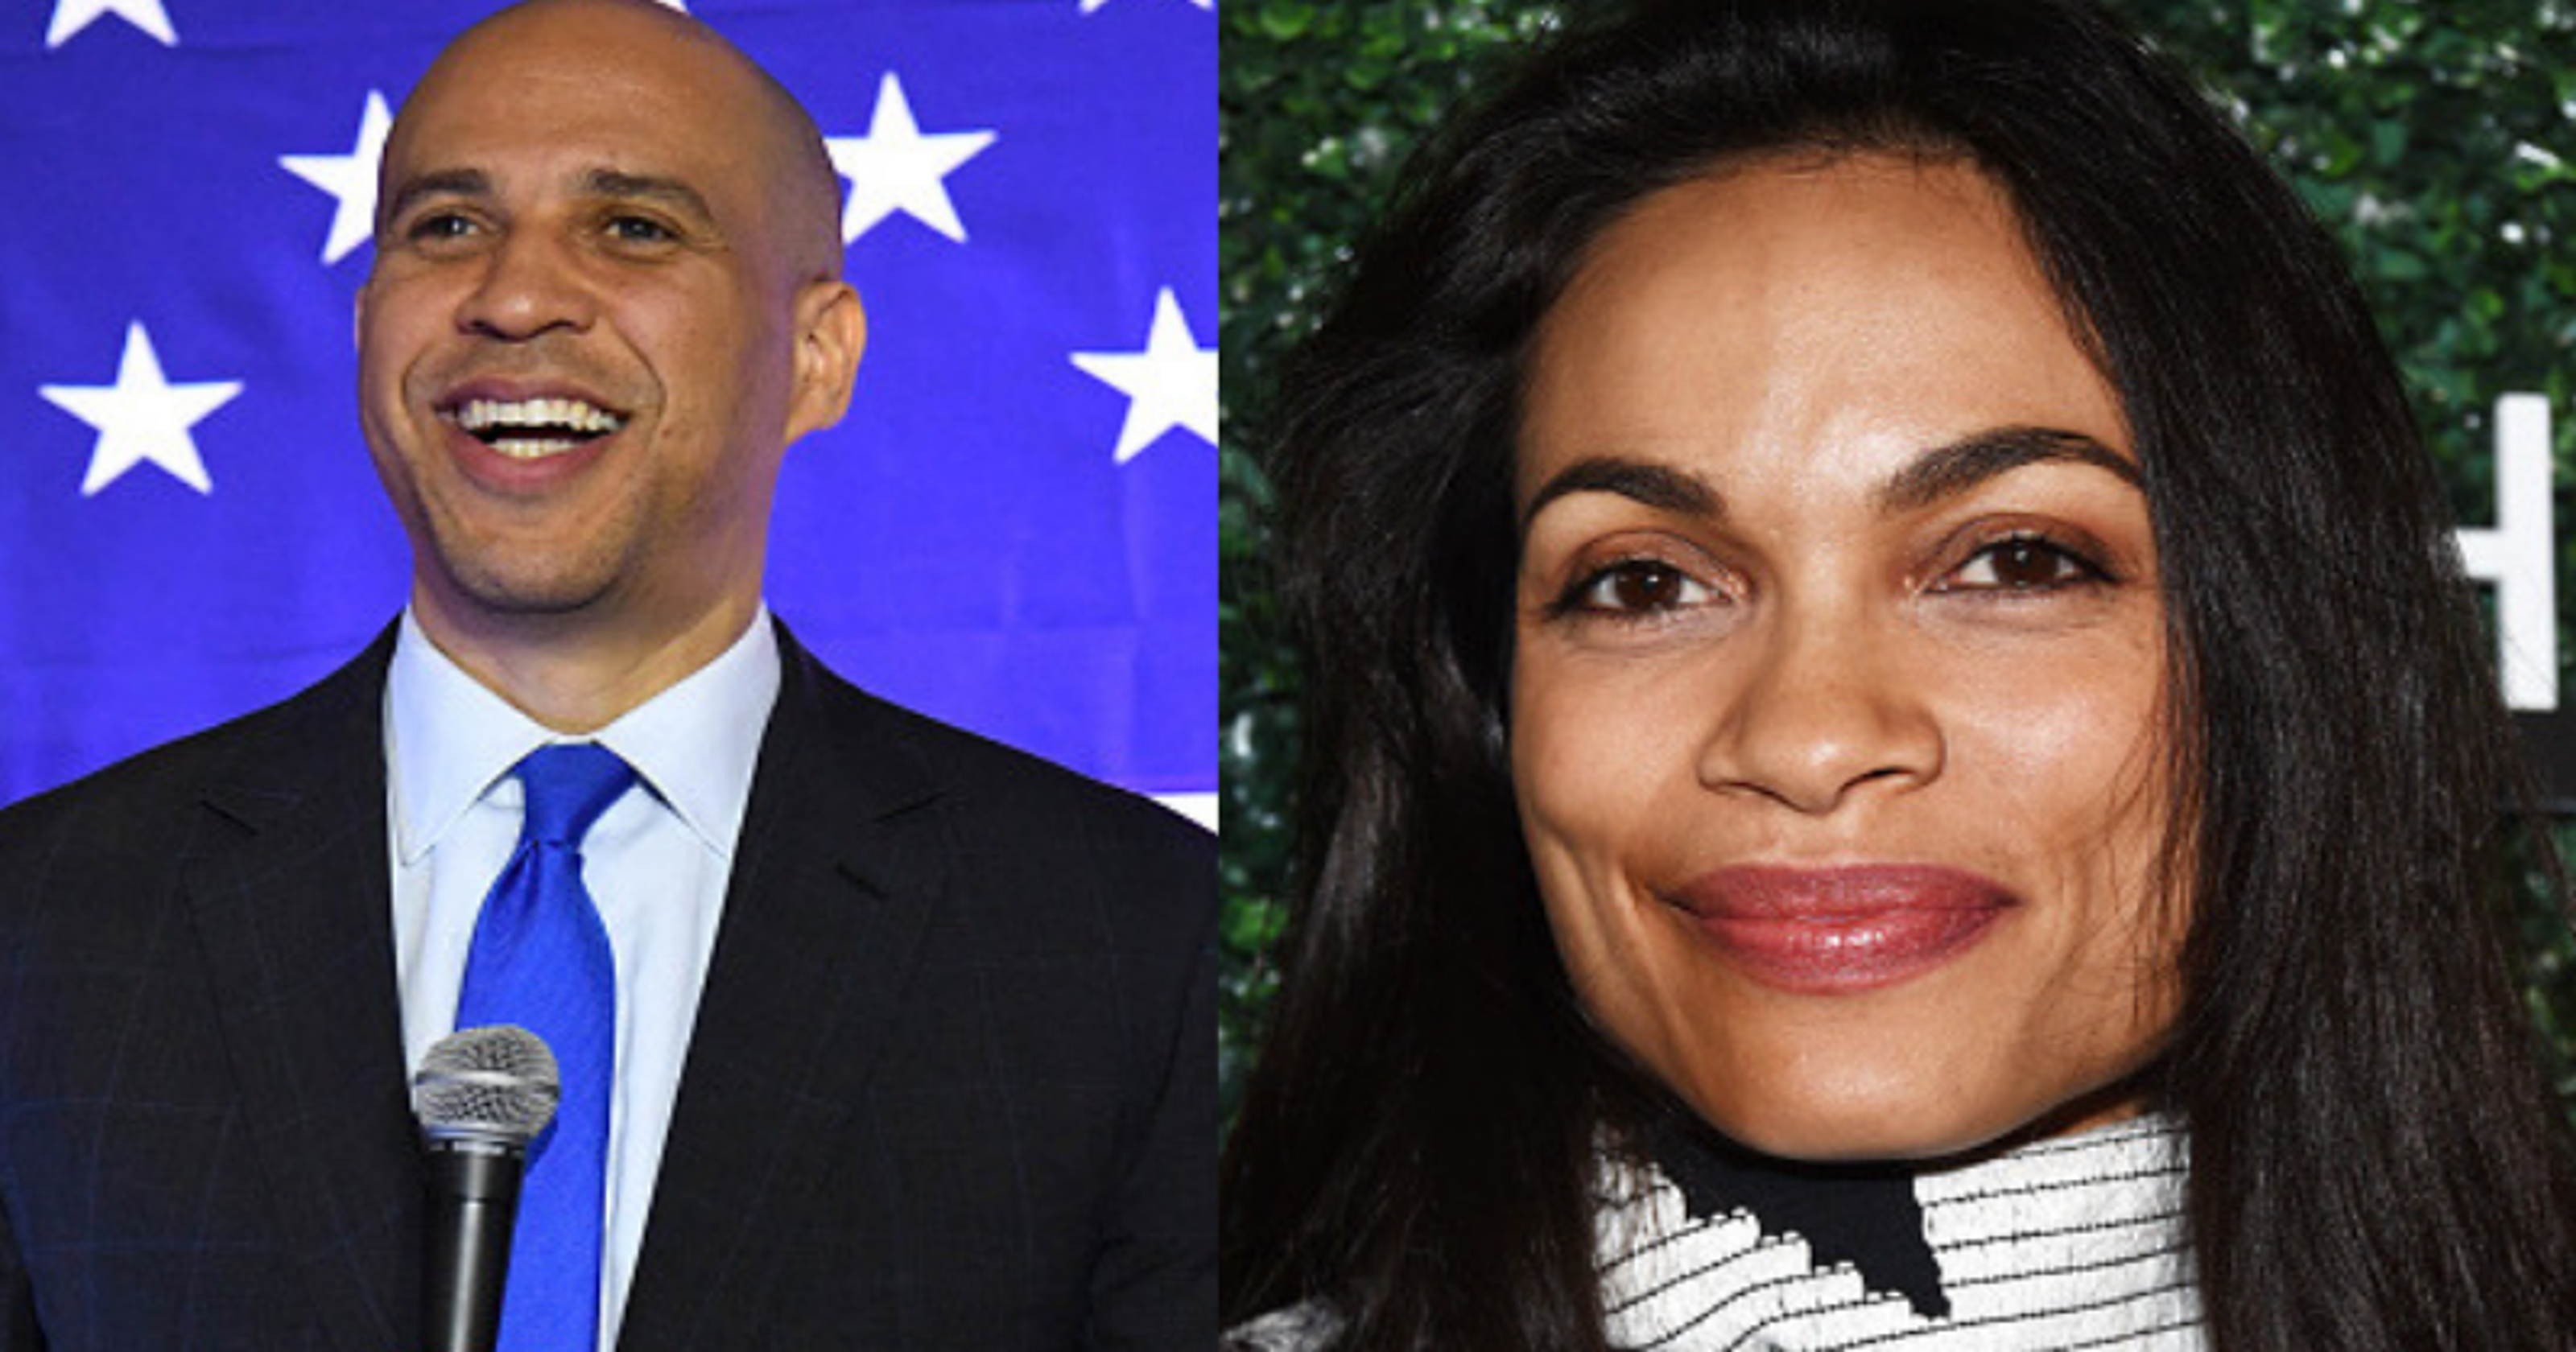 Cory Booker and Rosario Dawson are officially dating